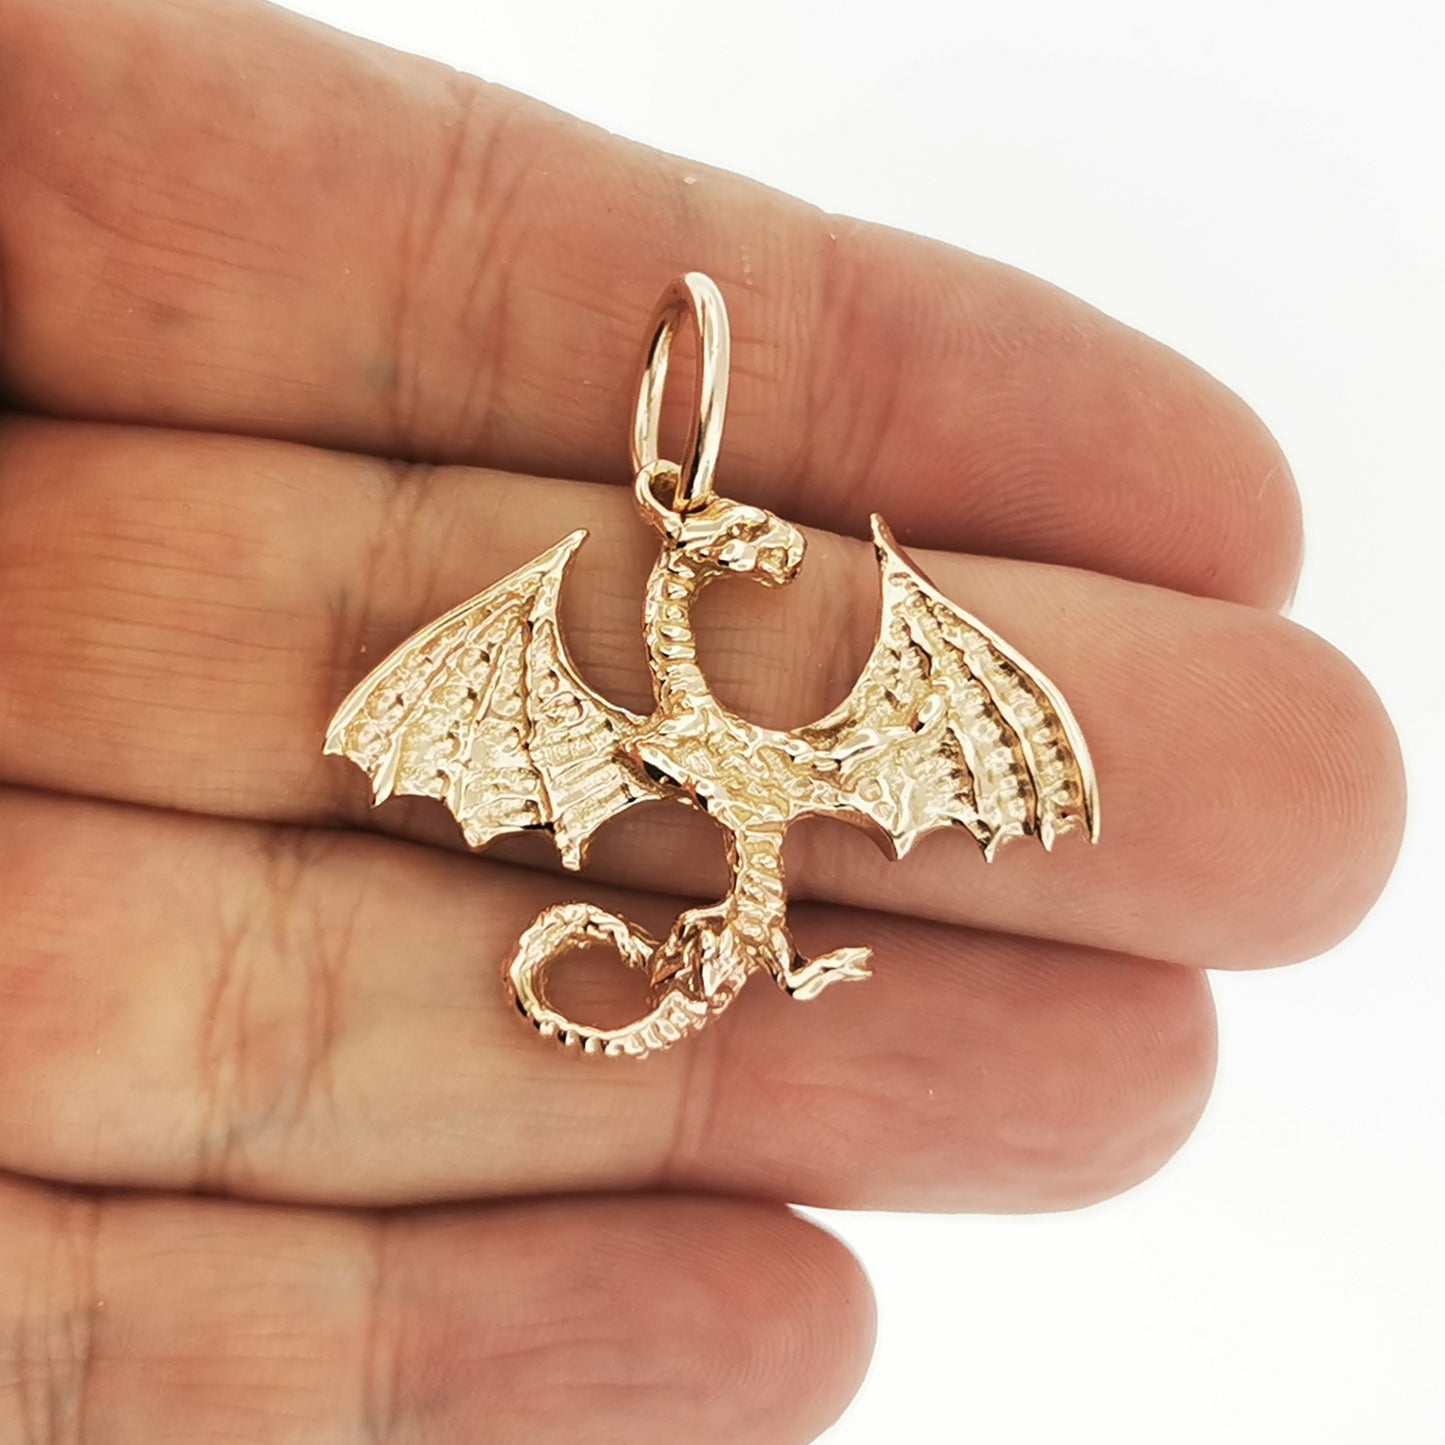 European Dragon Pendant in Sterling Silver or Antique Bronze, Bronze Dragon Pendant, Bronze Dragon Jewelry, bronze Dragon Jewellery, Bronze Dragon Pendant, Here Be Dragons, Bronze Dragon Charm, Bronze Dragon Jewellery, Medieval Dragon Pendant, Fantasy Dragon Pendant, European Dragon Pendant